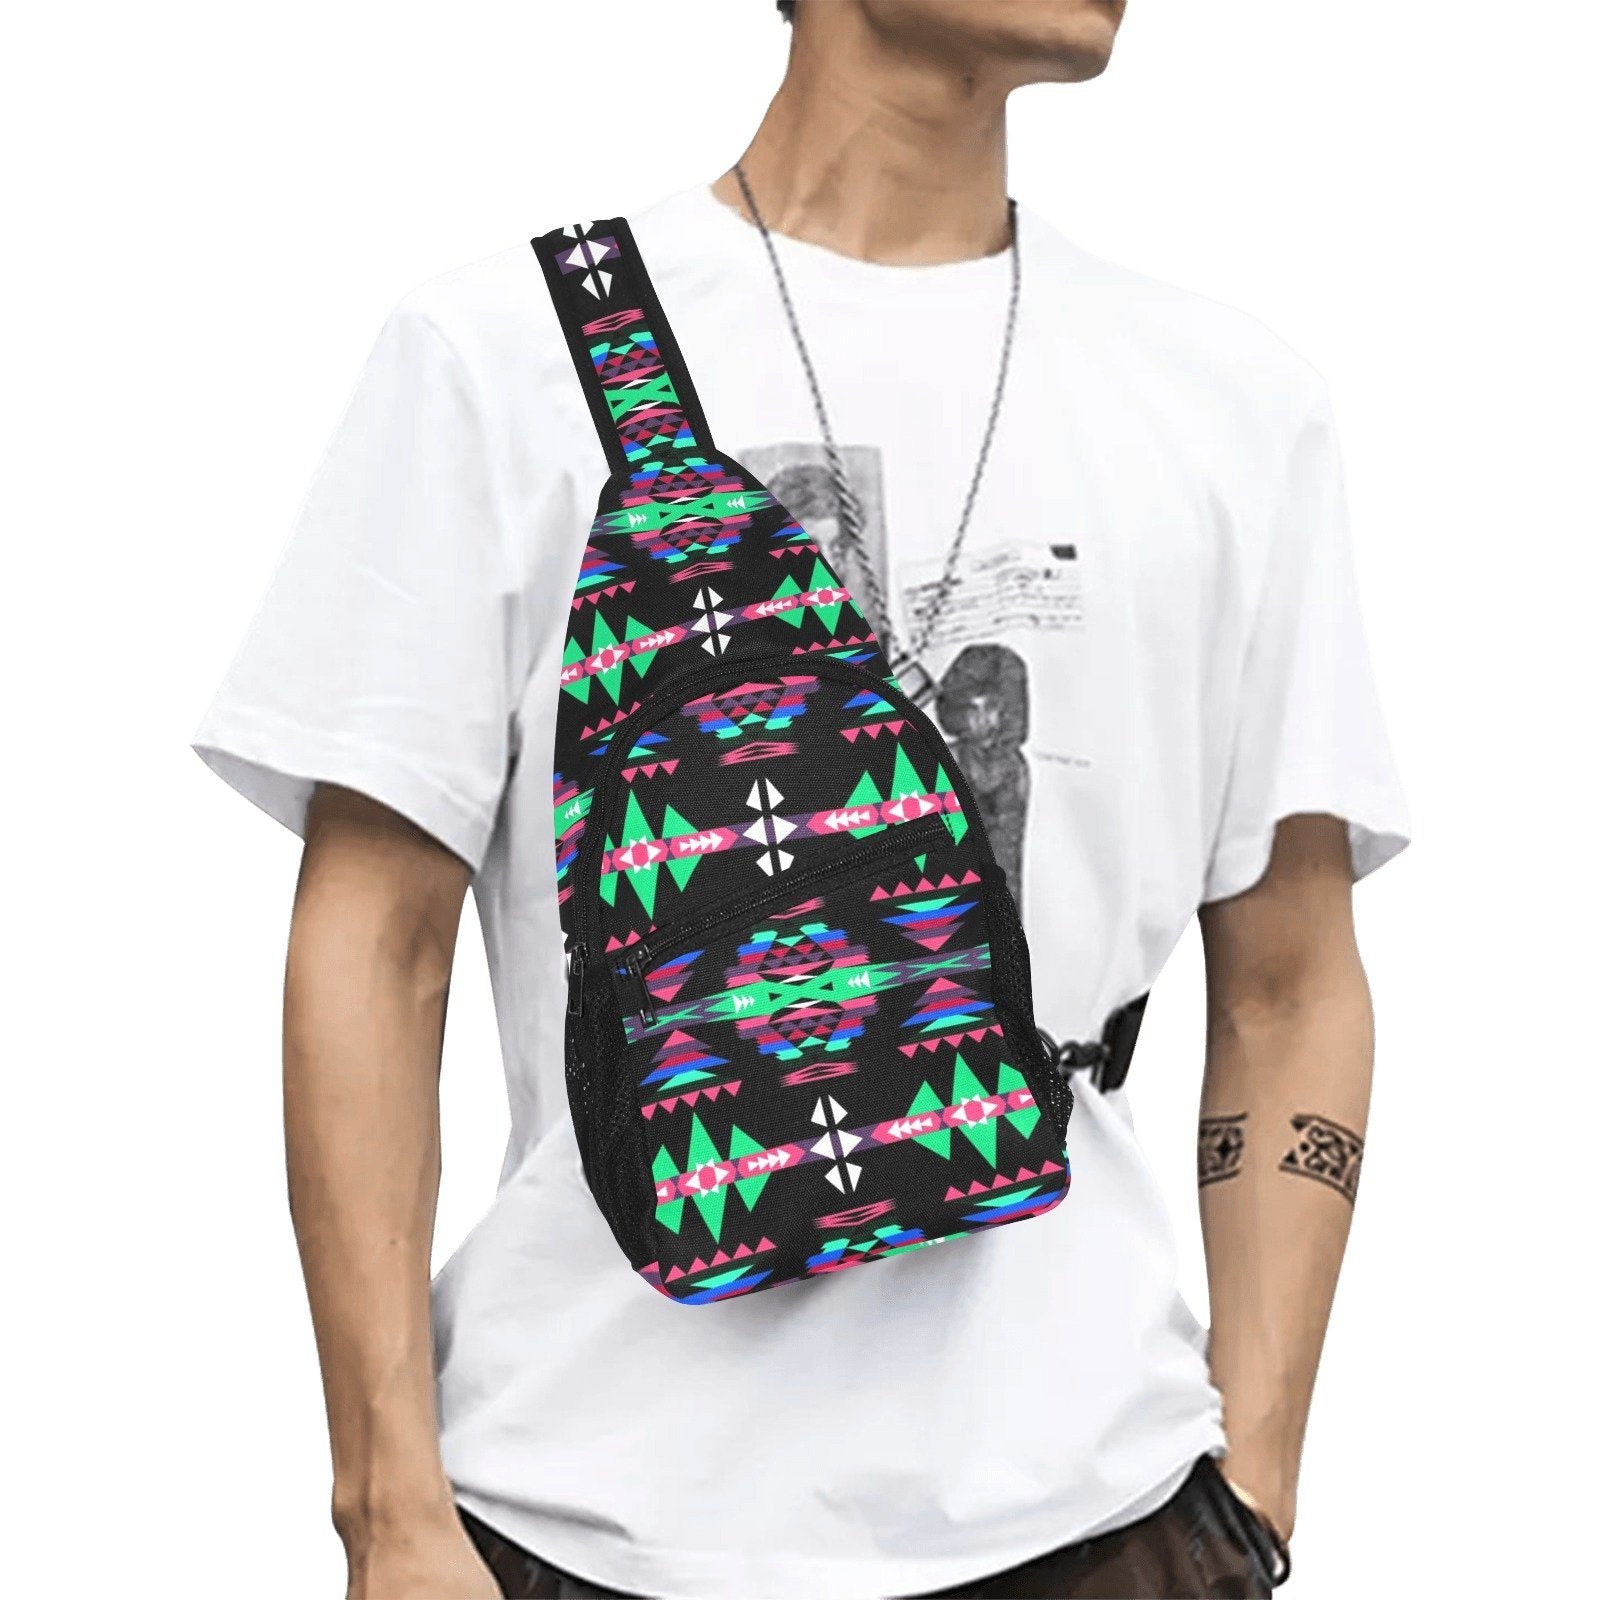 River Trail Journey All Over Print Chest Bag (Model 1719) All Over Print Chest Bag (1719) e-joyer 